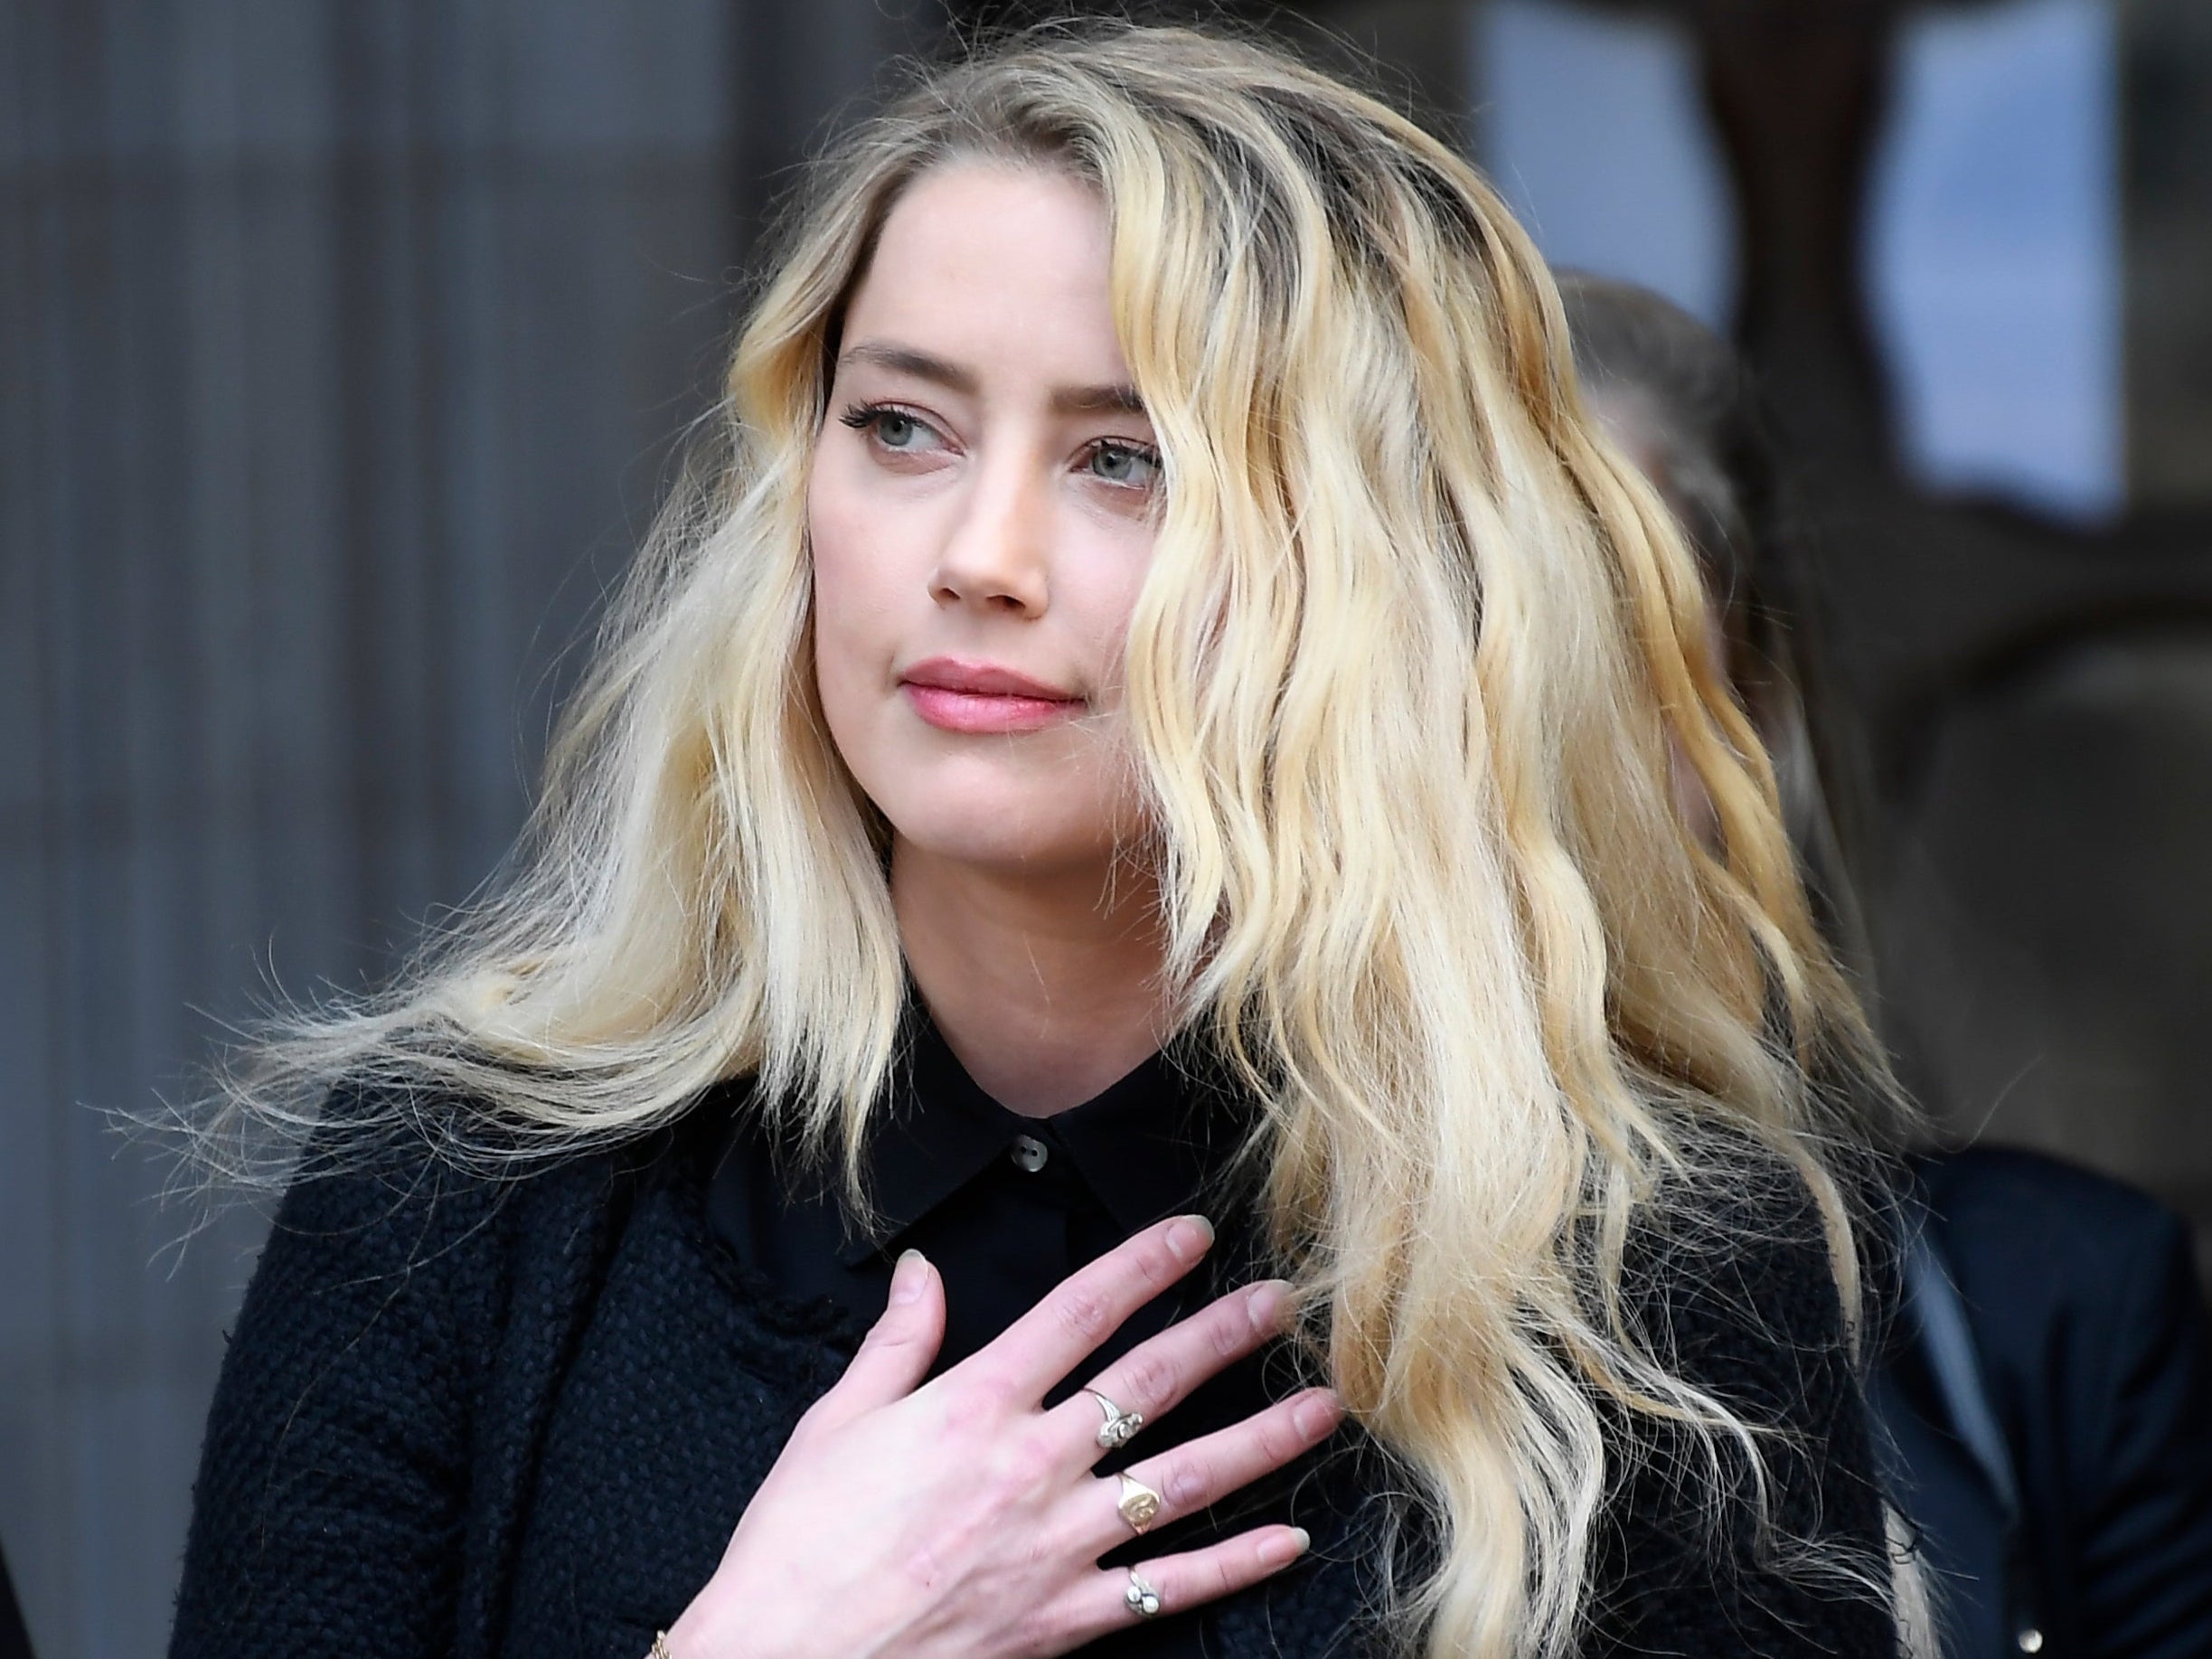 American actress Amber Heard, former wife of actor Johnny Depp, gives a statement outside the High Court in London